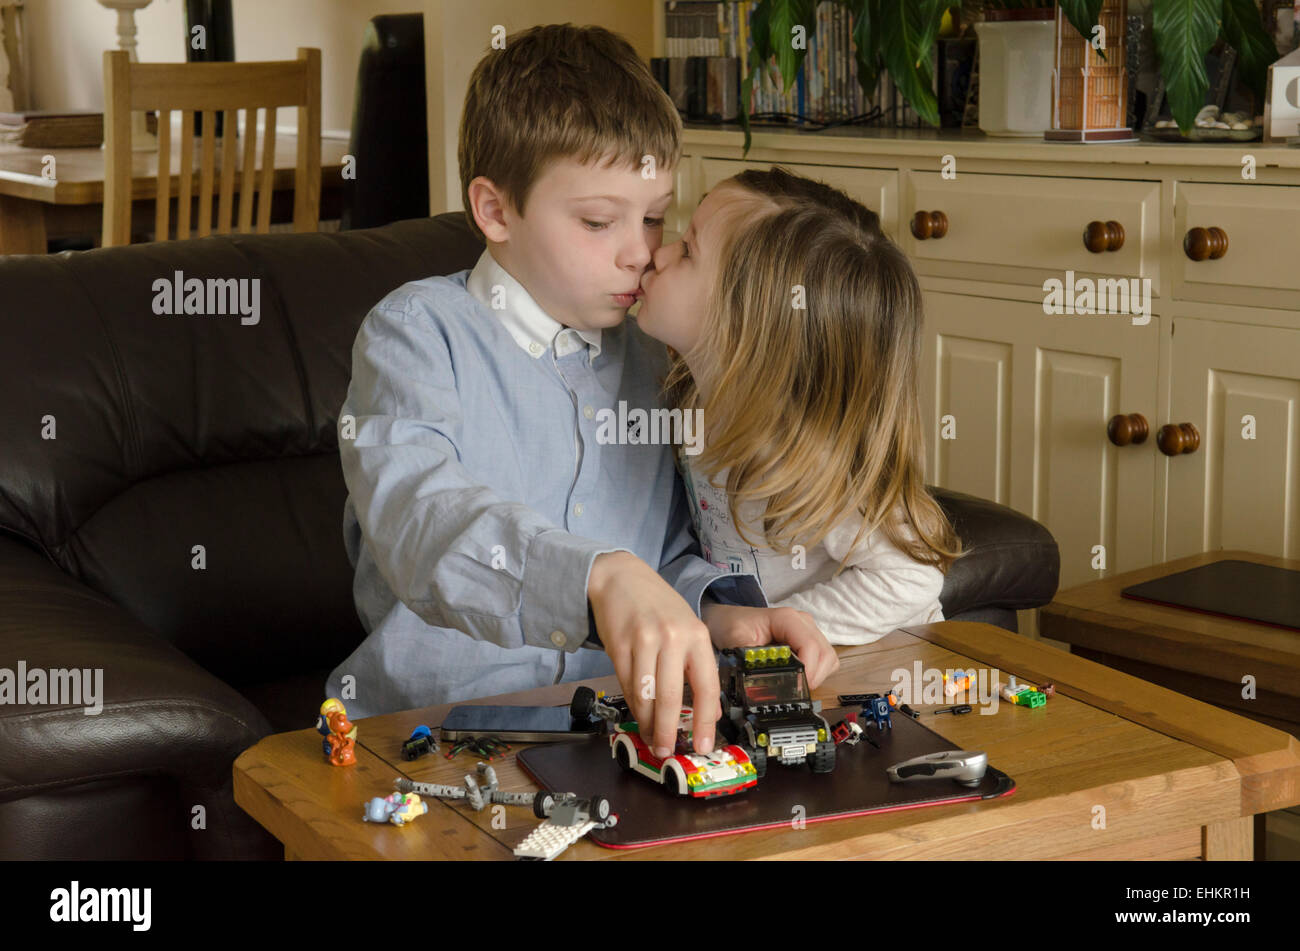 boy, eight years old, with sister, two years old, playing with Lego together. Girl kissing boy but he is busy playing, UK. Stock Photo